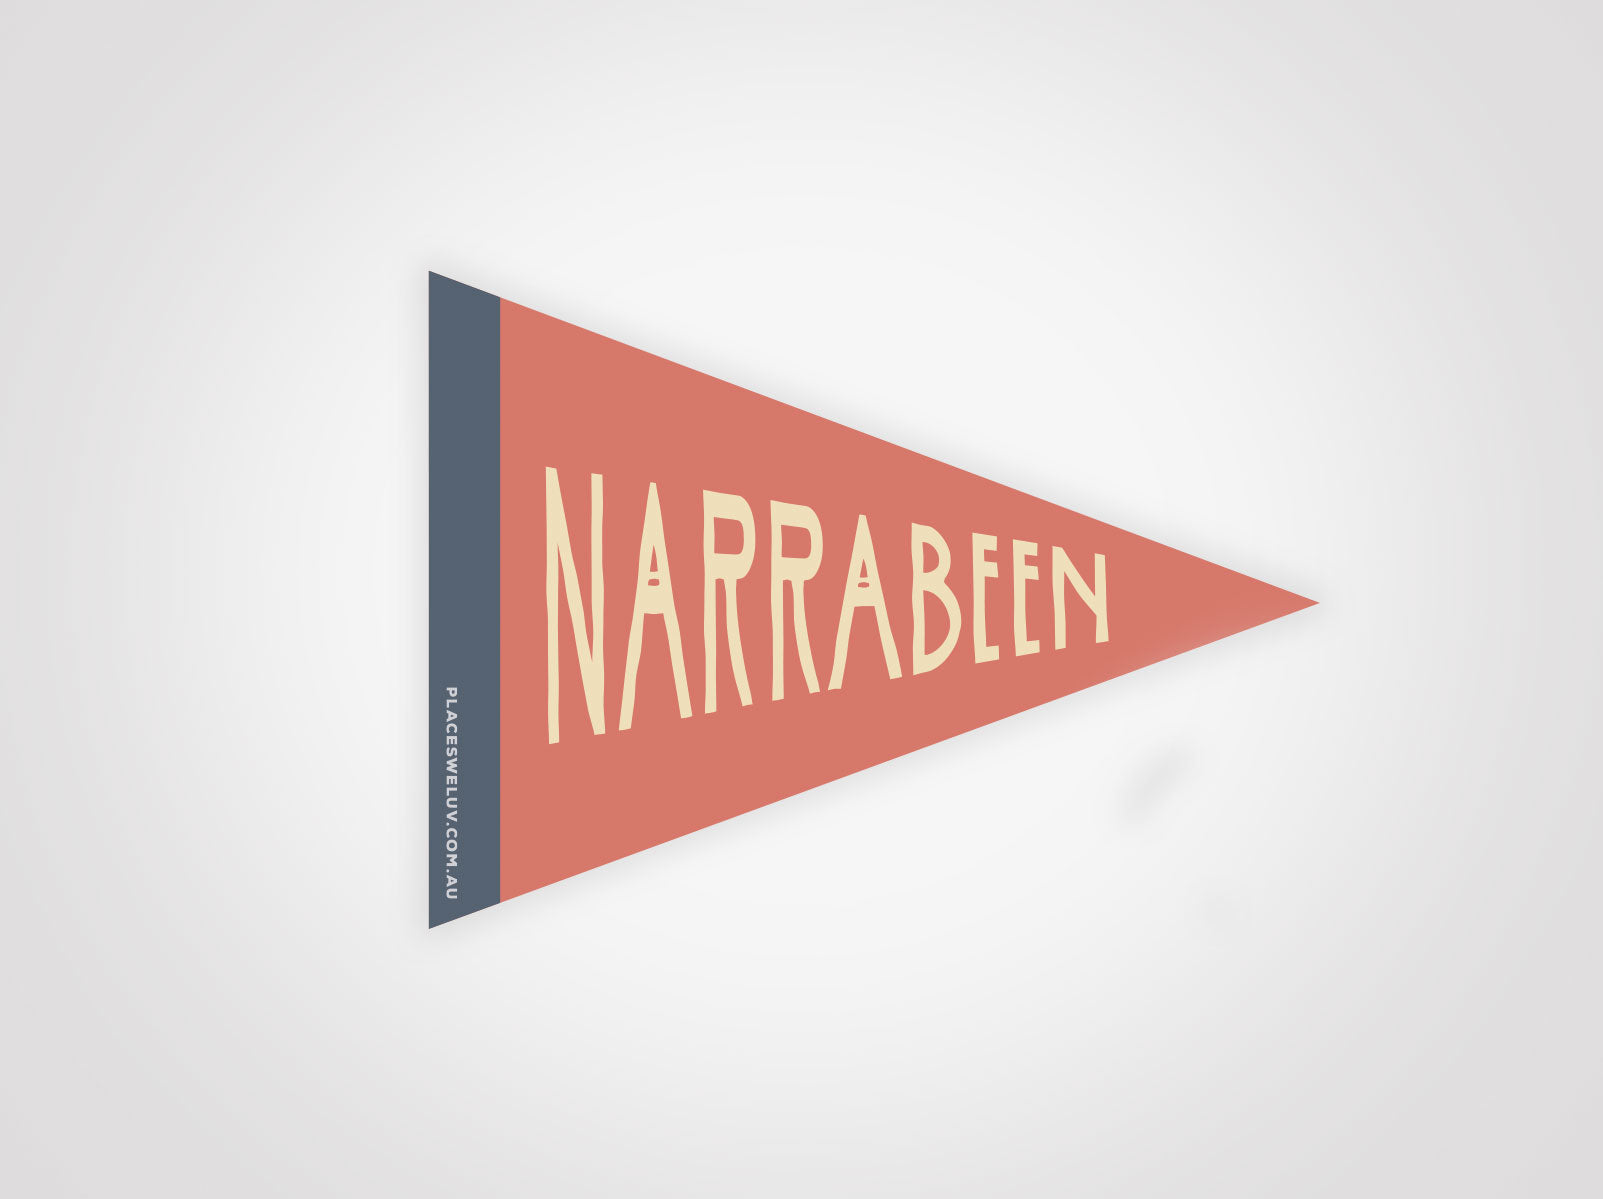 Narrabeen vintage travel style flag decal by places we luv